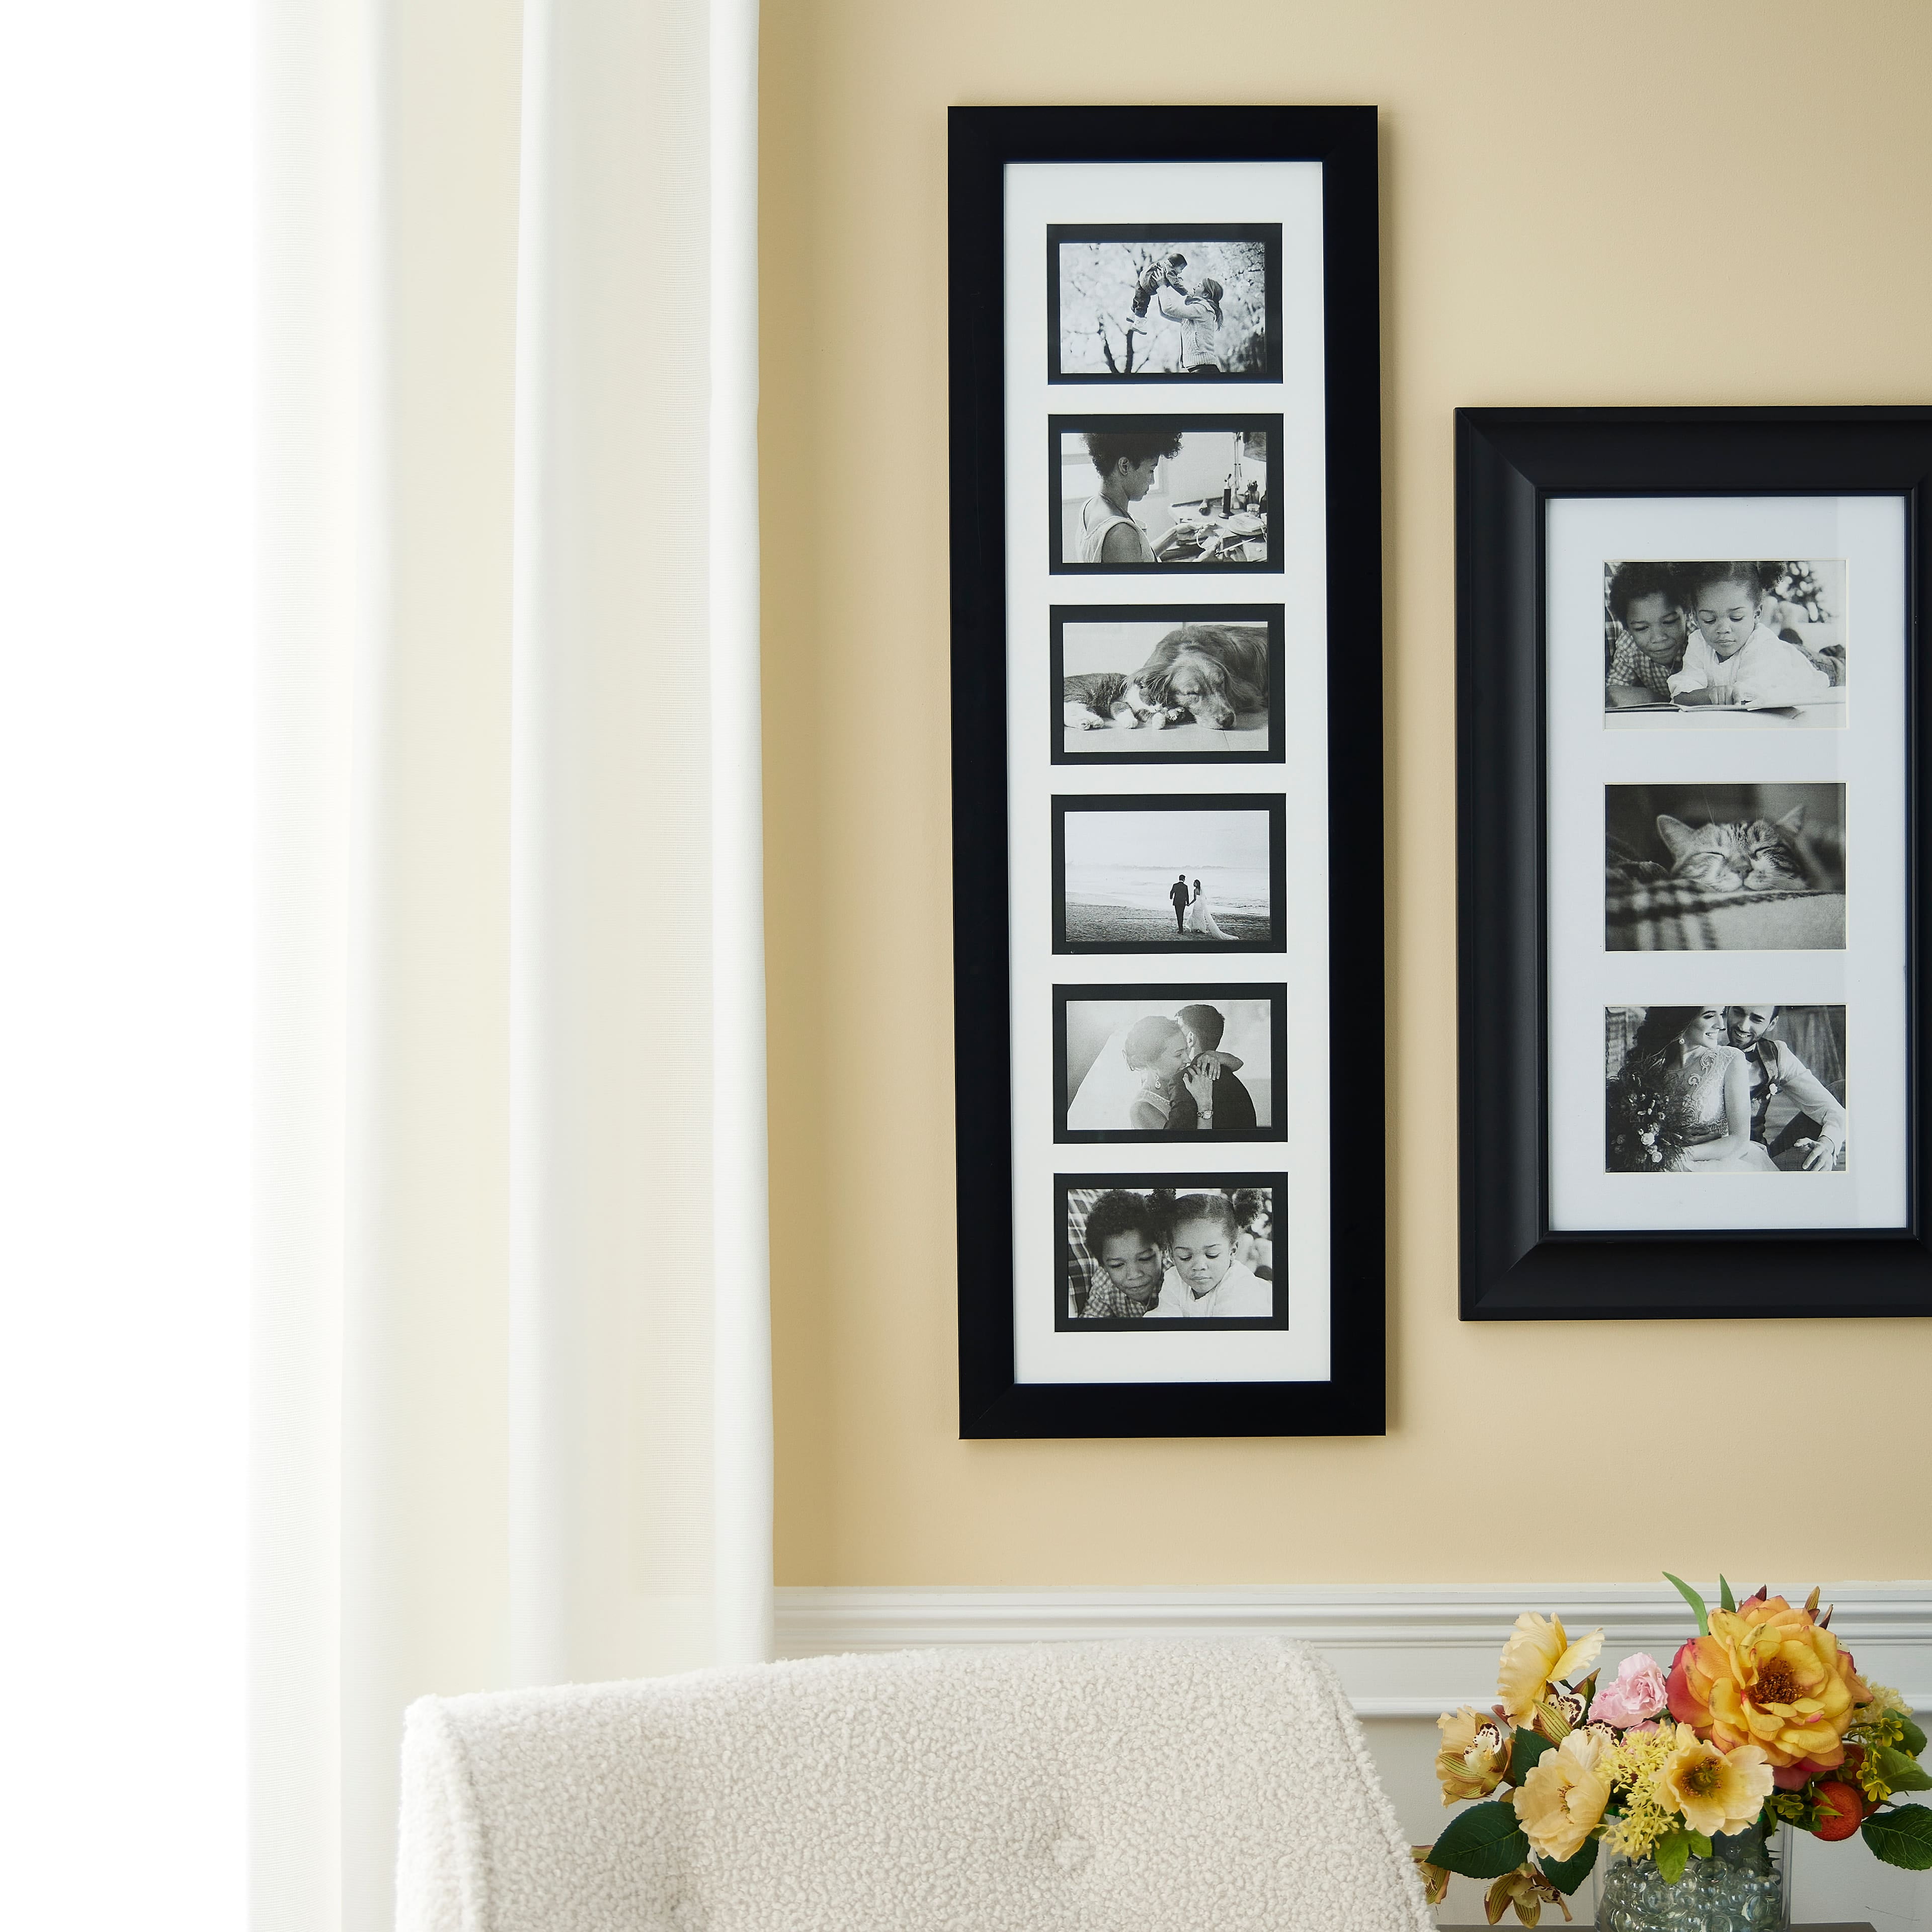 3 Opening White 4 x 6 Collage Frame, Expressions™ by Studio Décor®